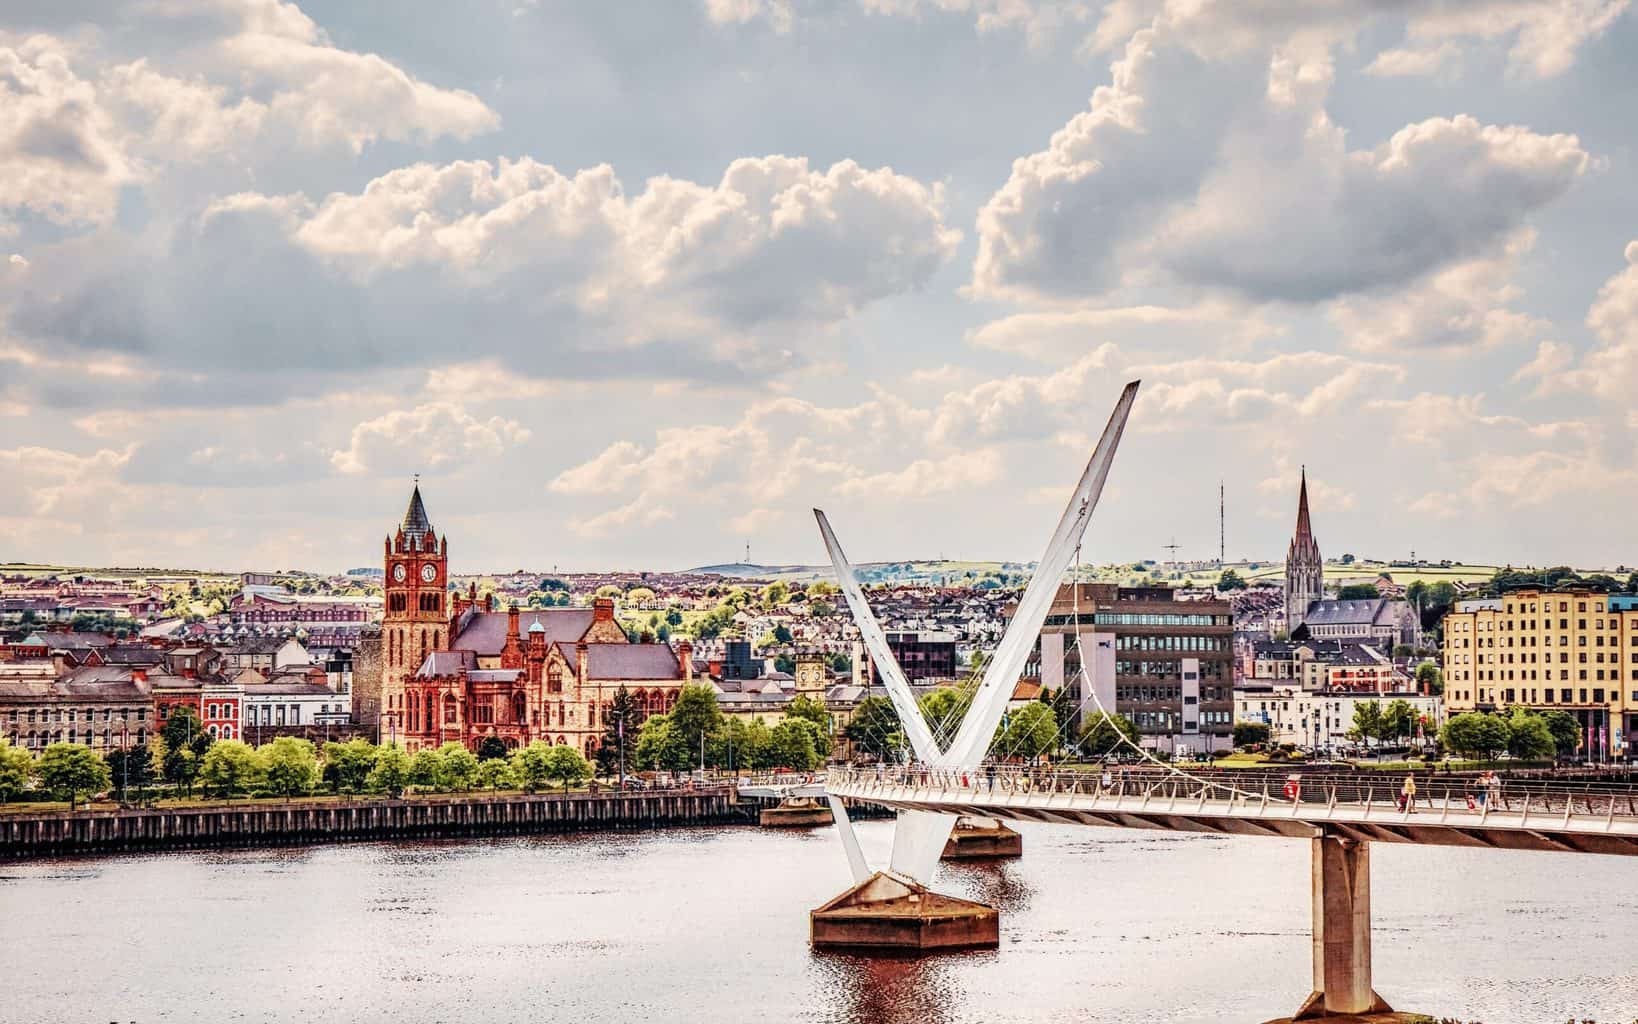 Looking across the River Foyle to the cityside from the waterside, with The Peace Bridge framed by The Guild Hall (left) and St. Eugene's Cathedral (right) (May, 2021).